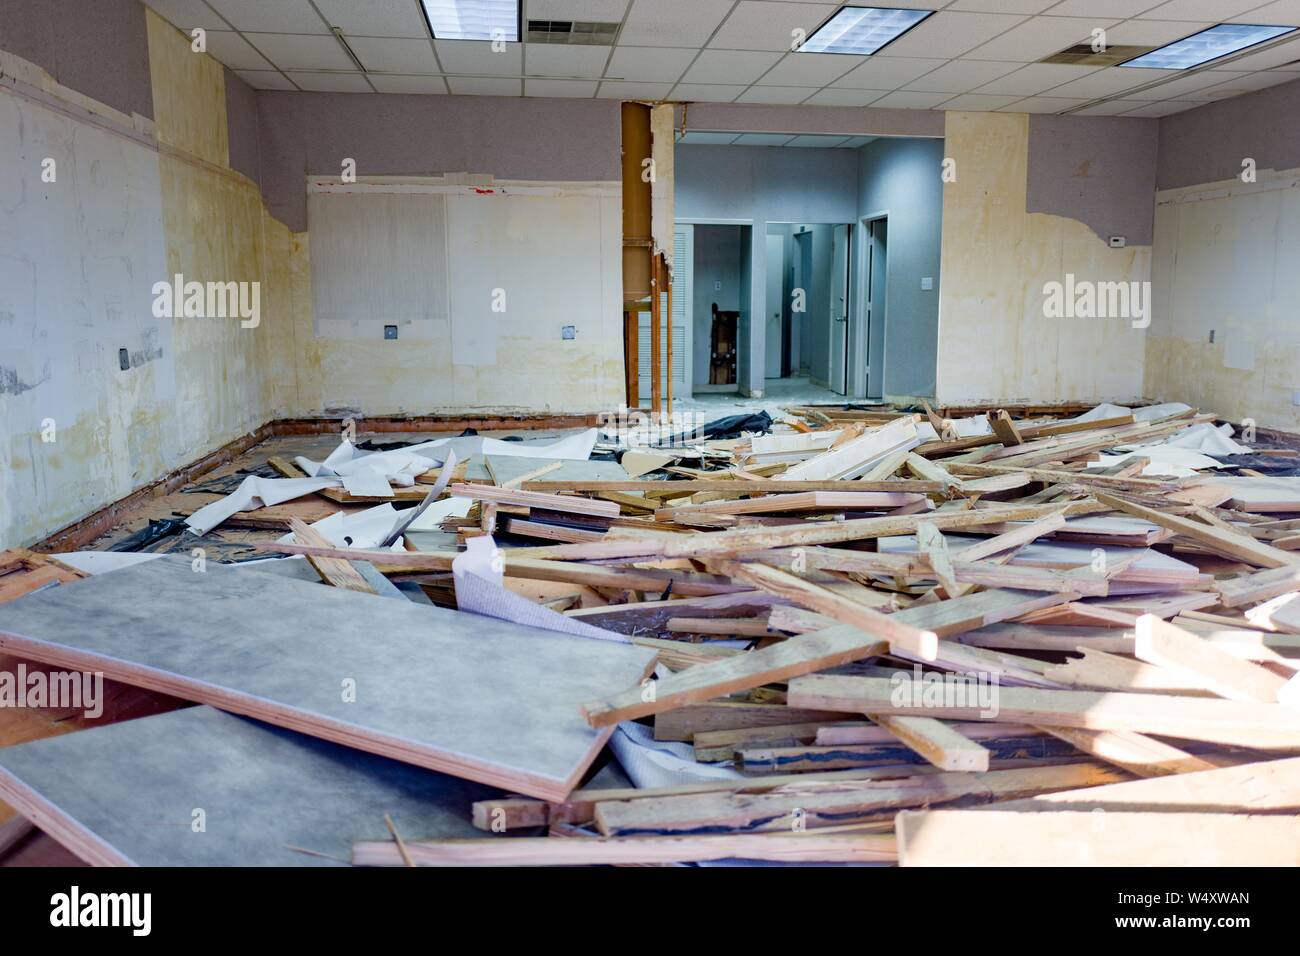 Interior view of closed or out of business retail store whose interior is in the process of being demolished, with debris and wooden boards in a large and disorganized pile, walls stripped of fixtures and paint, in Albany, California, December 18, 2018. () Stock Photo